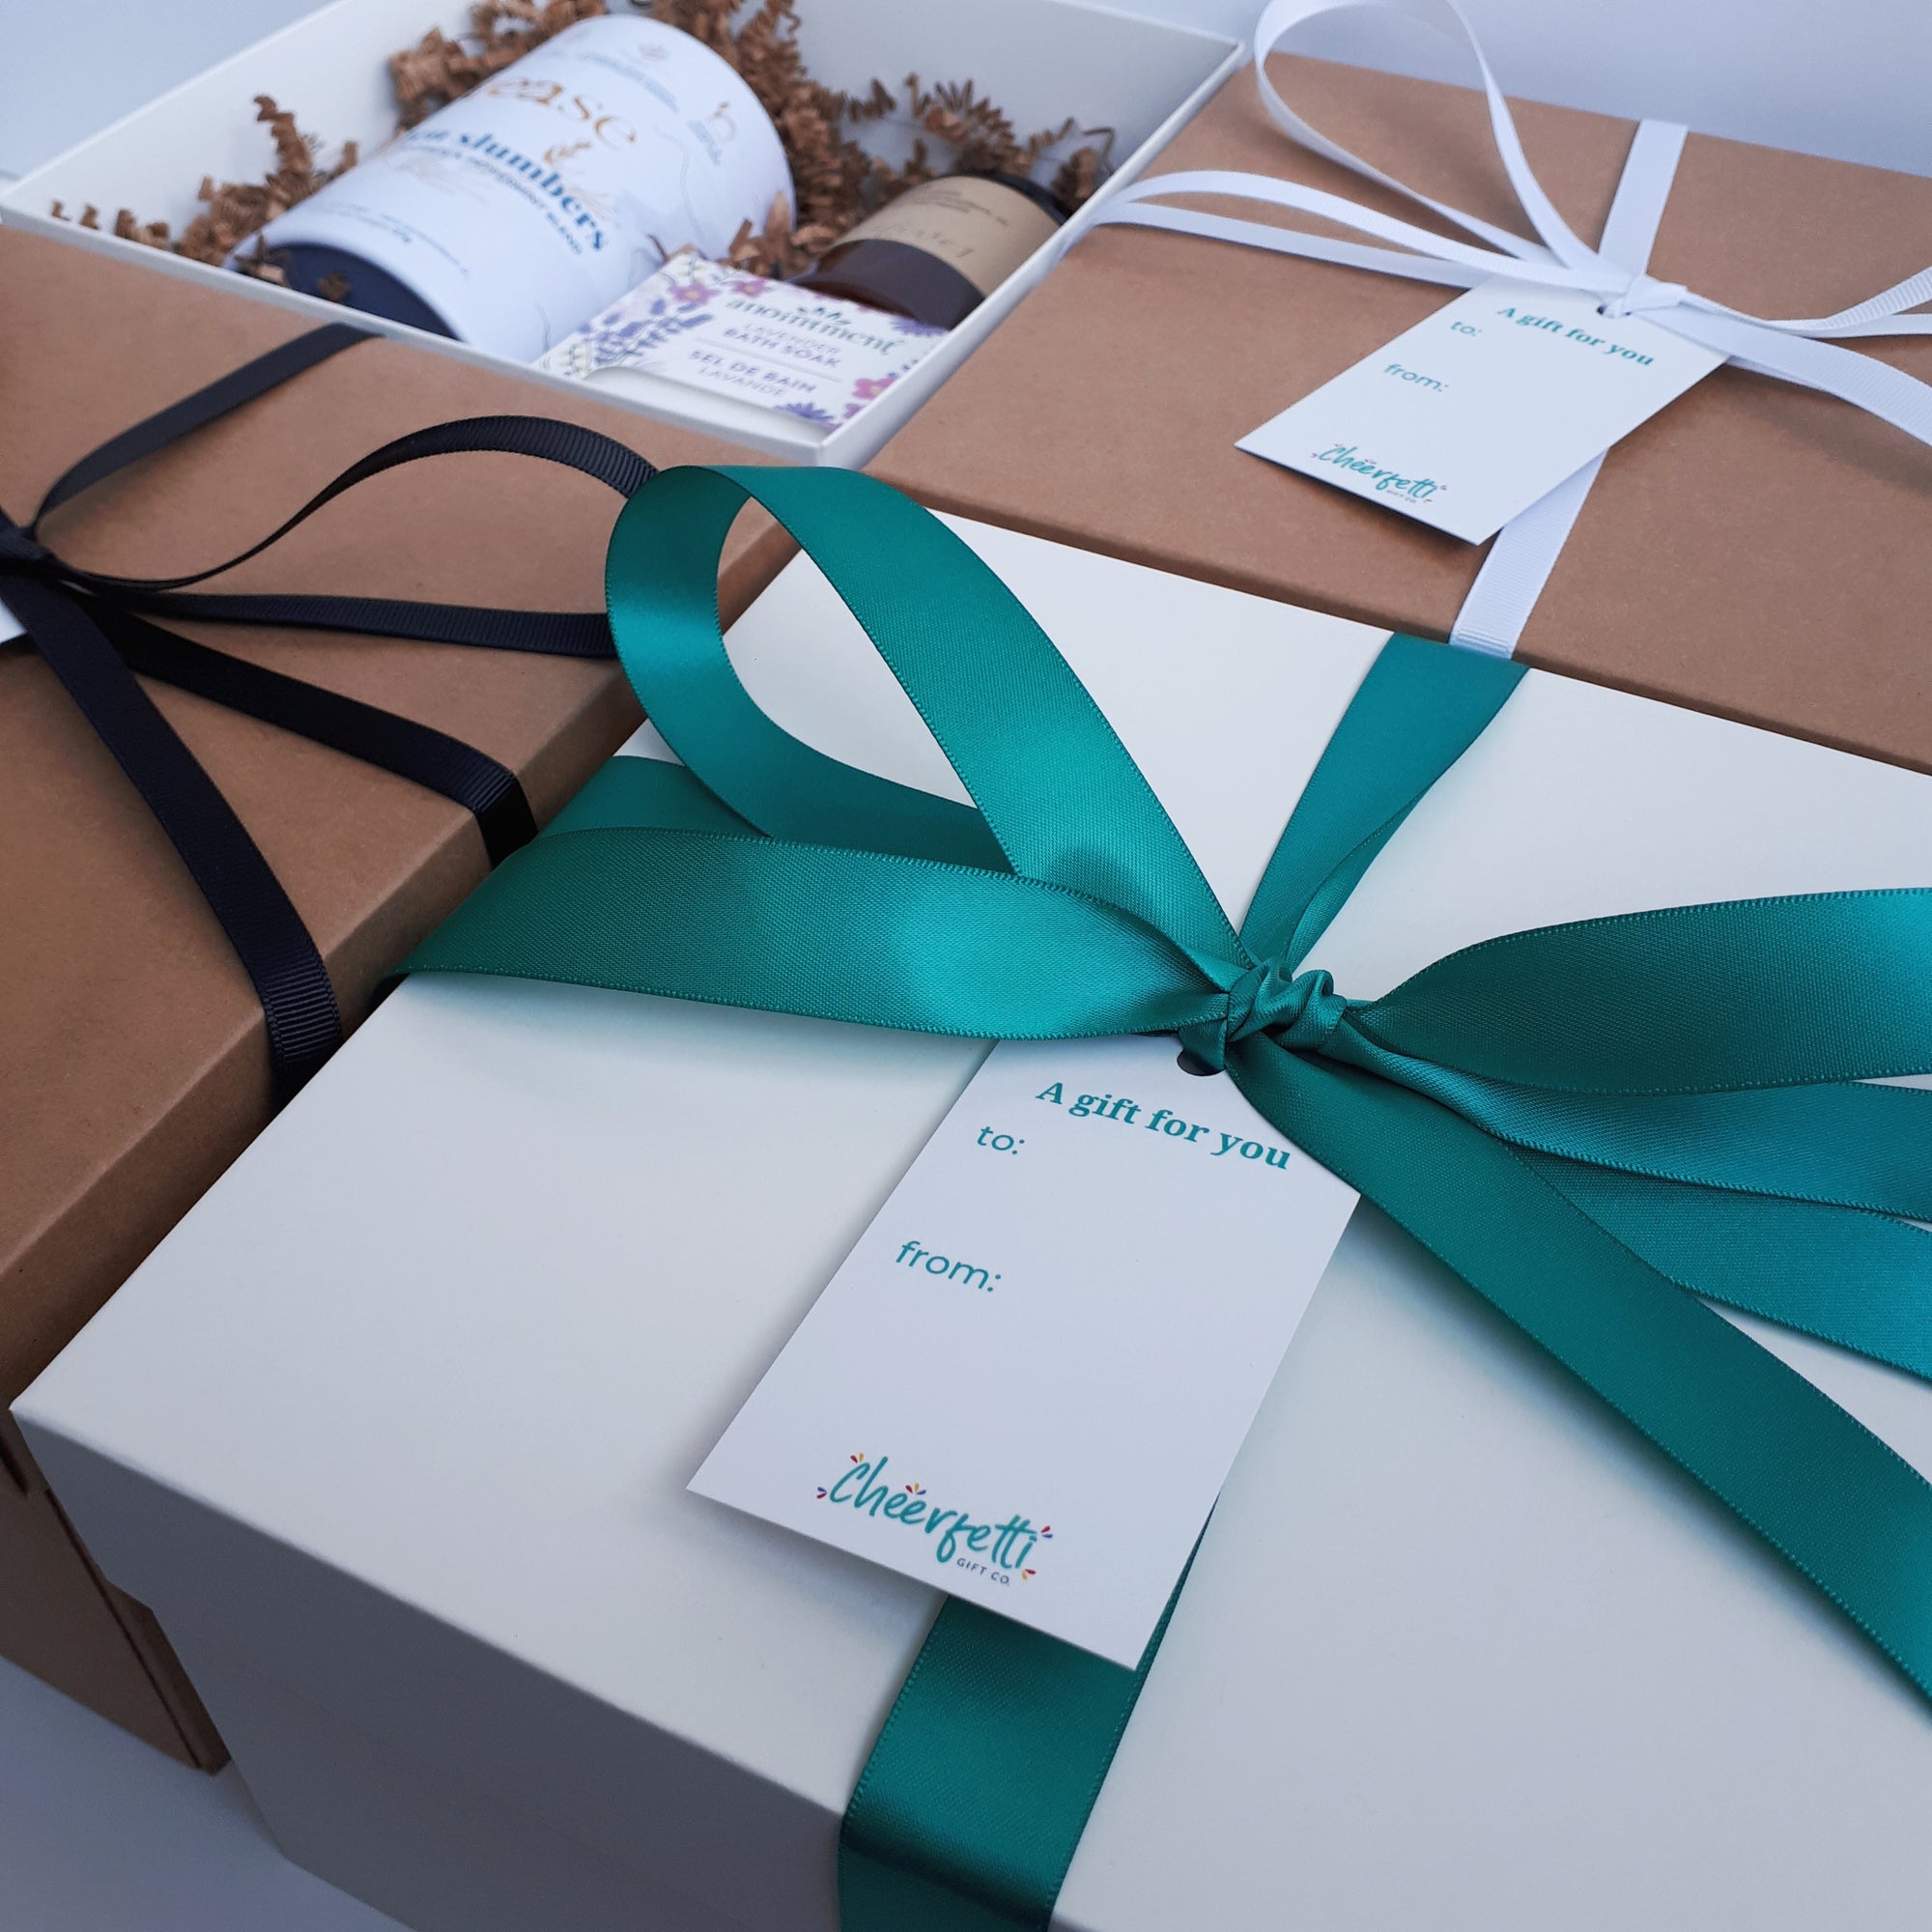 Build Your Own Gift Box with Cheerfetti Gift Co. Three gift boxes with different box and ribbon colour options, and a fourth showing some gifts inside.